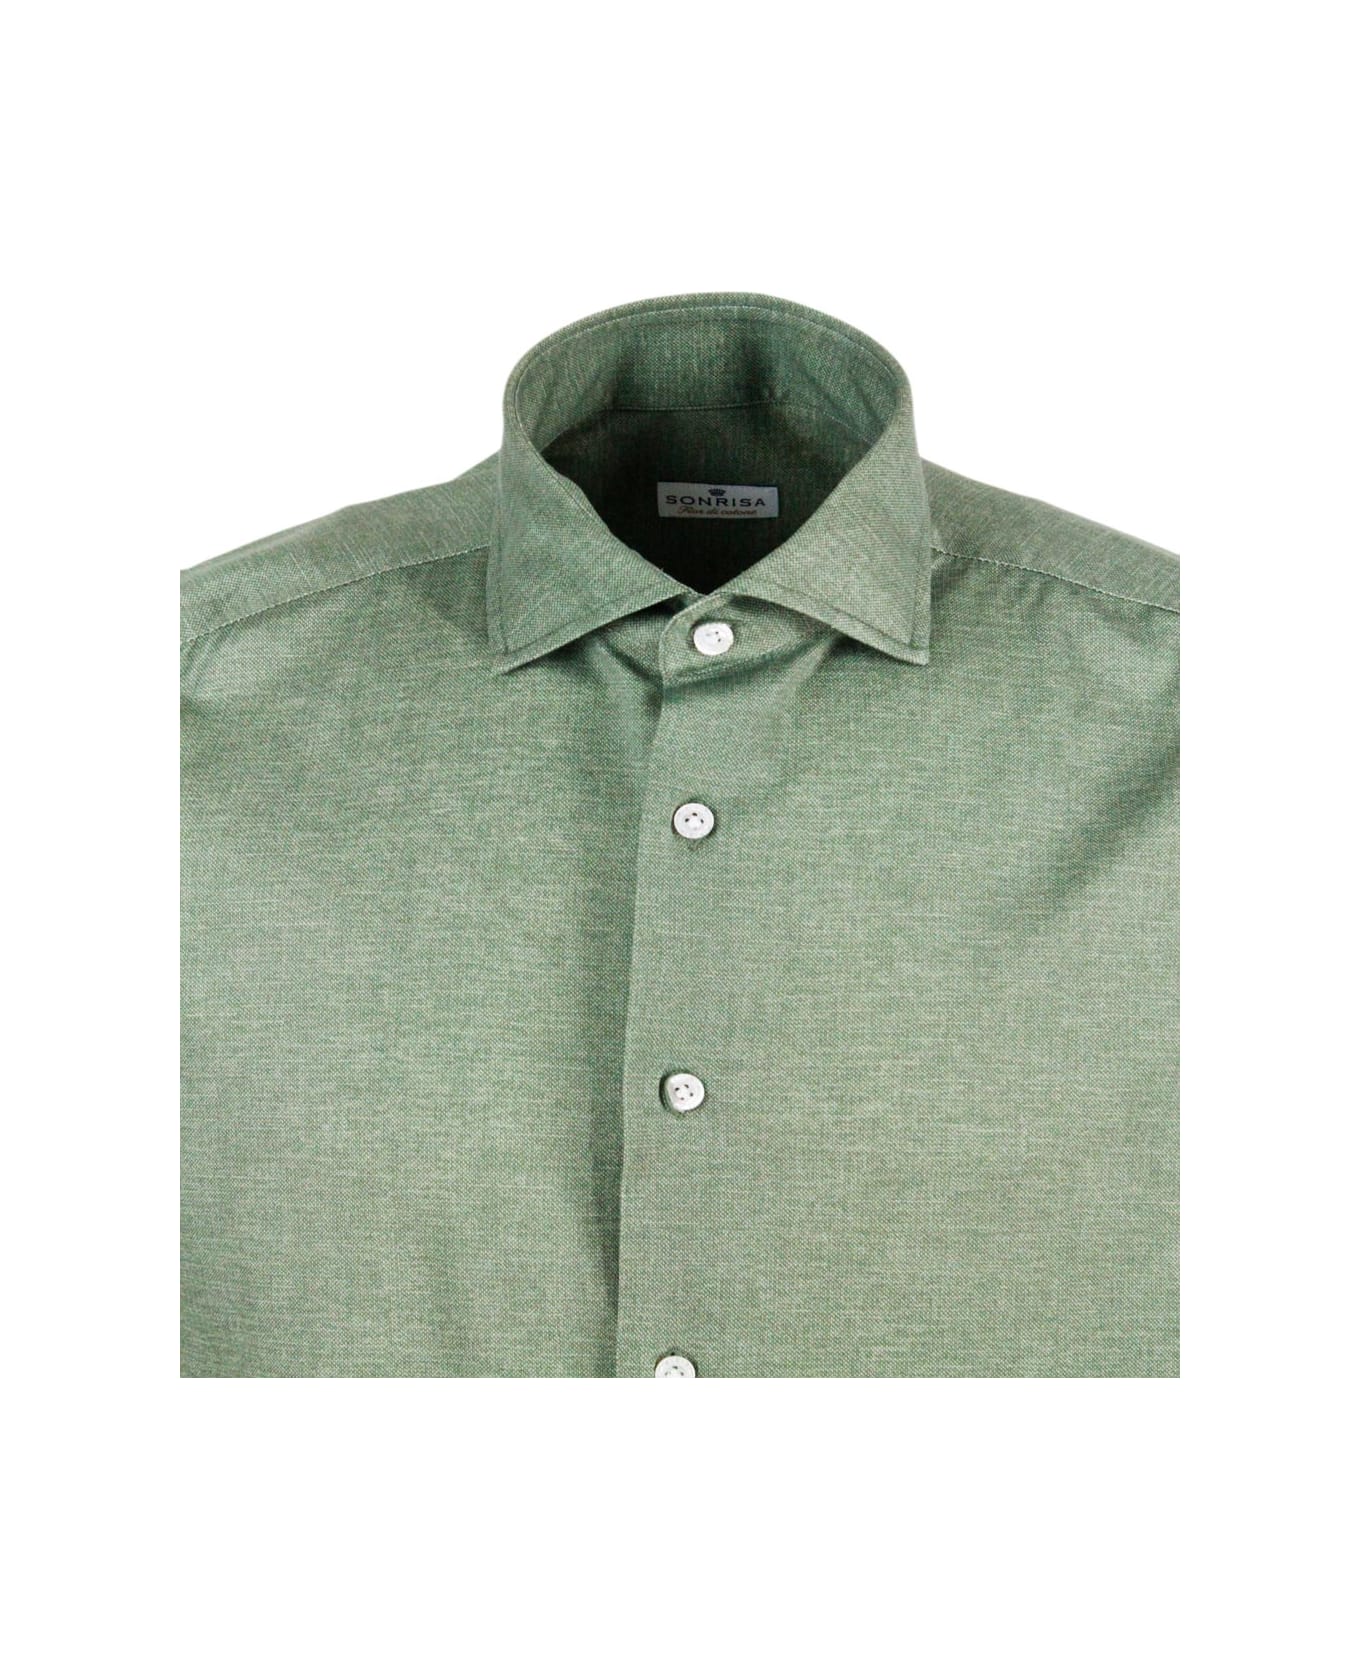 Sonrisa Luxury Shirt In Soft, Precious And Very Fine Stretch Cotton Flower With French Collar In Two-tone Melange Print - Green シャツ